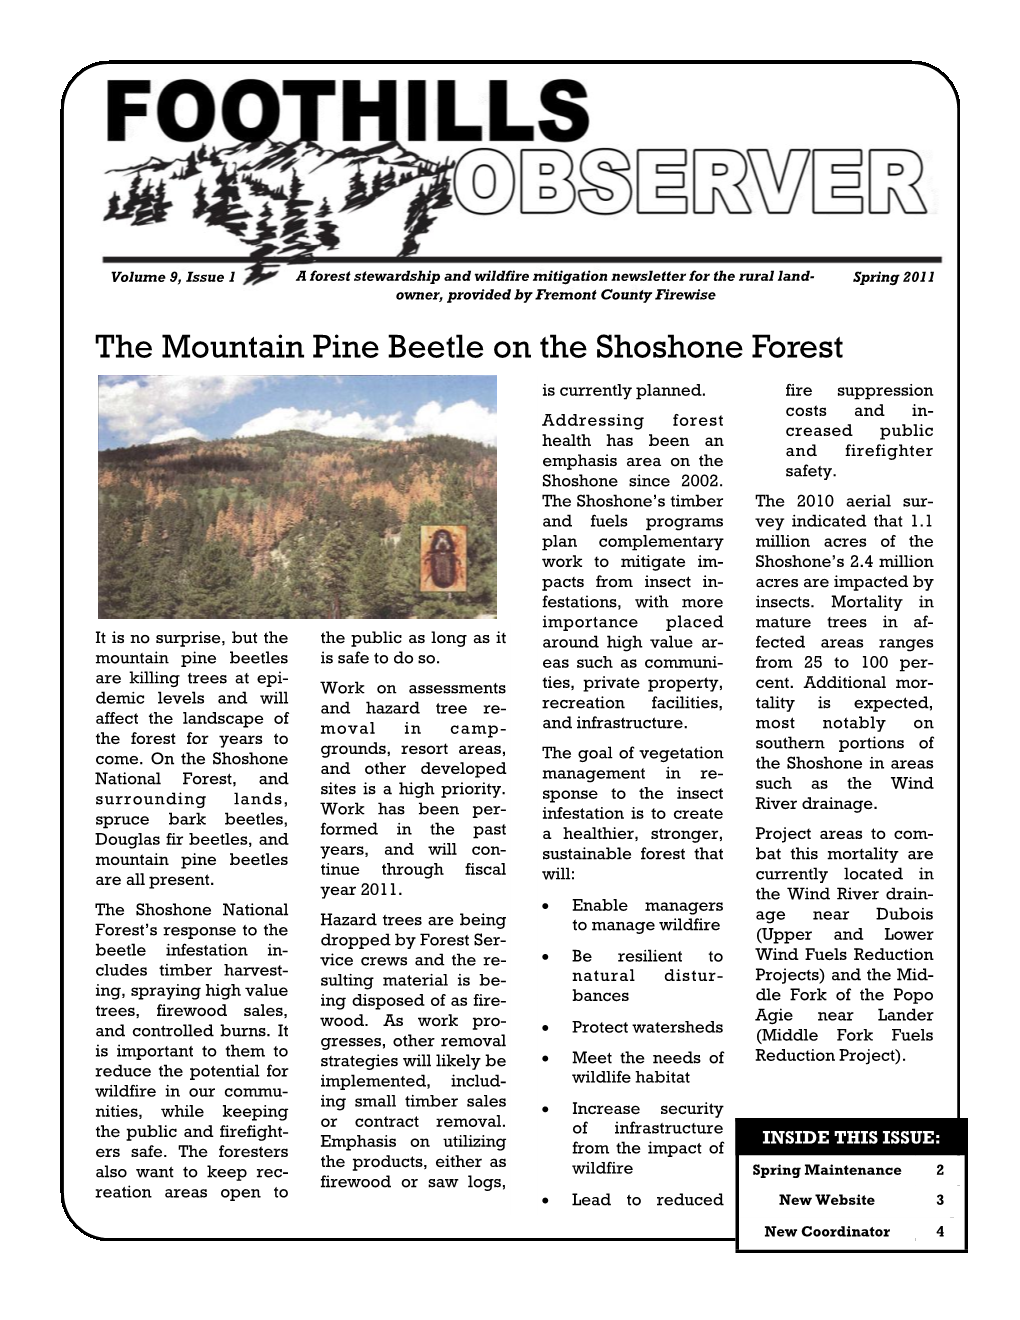 The Mountain Pine Beetle on the Shoshone Forest